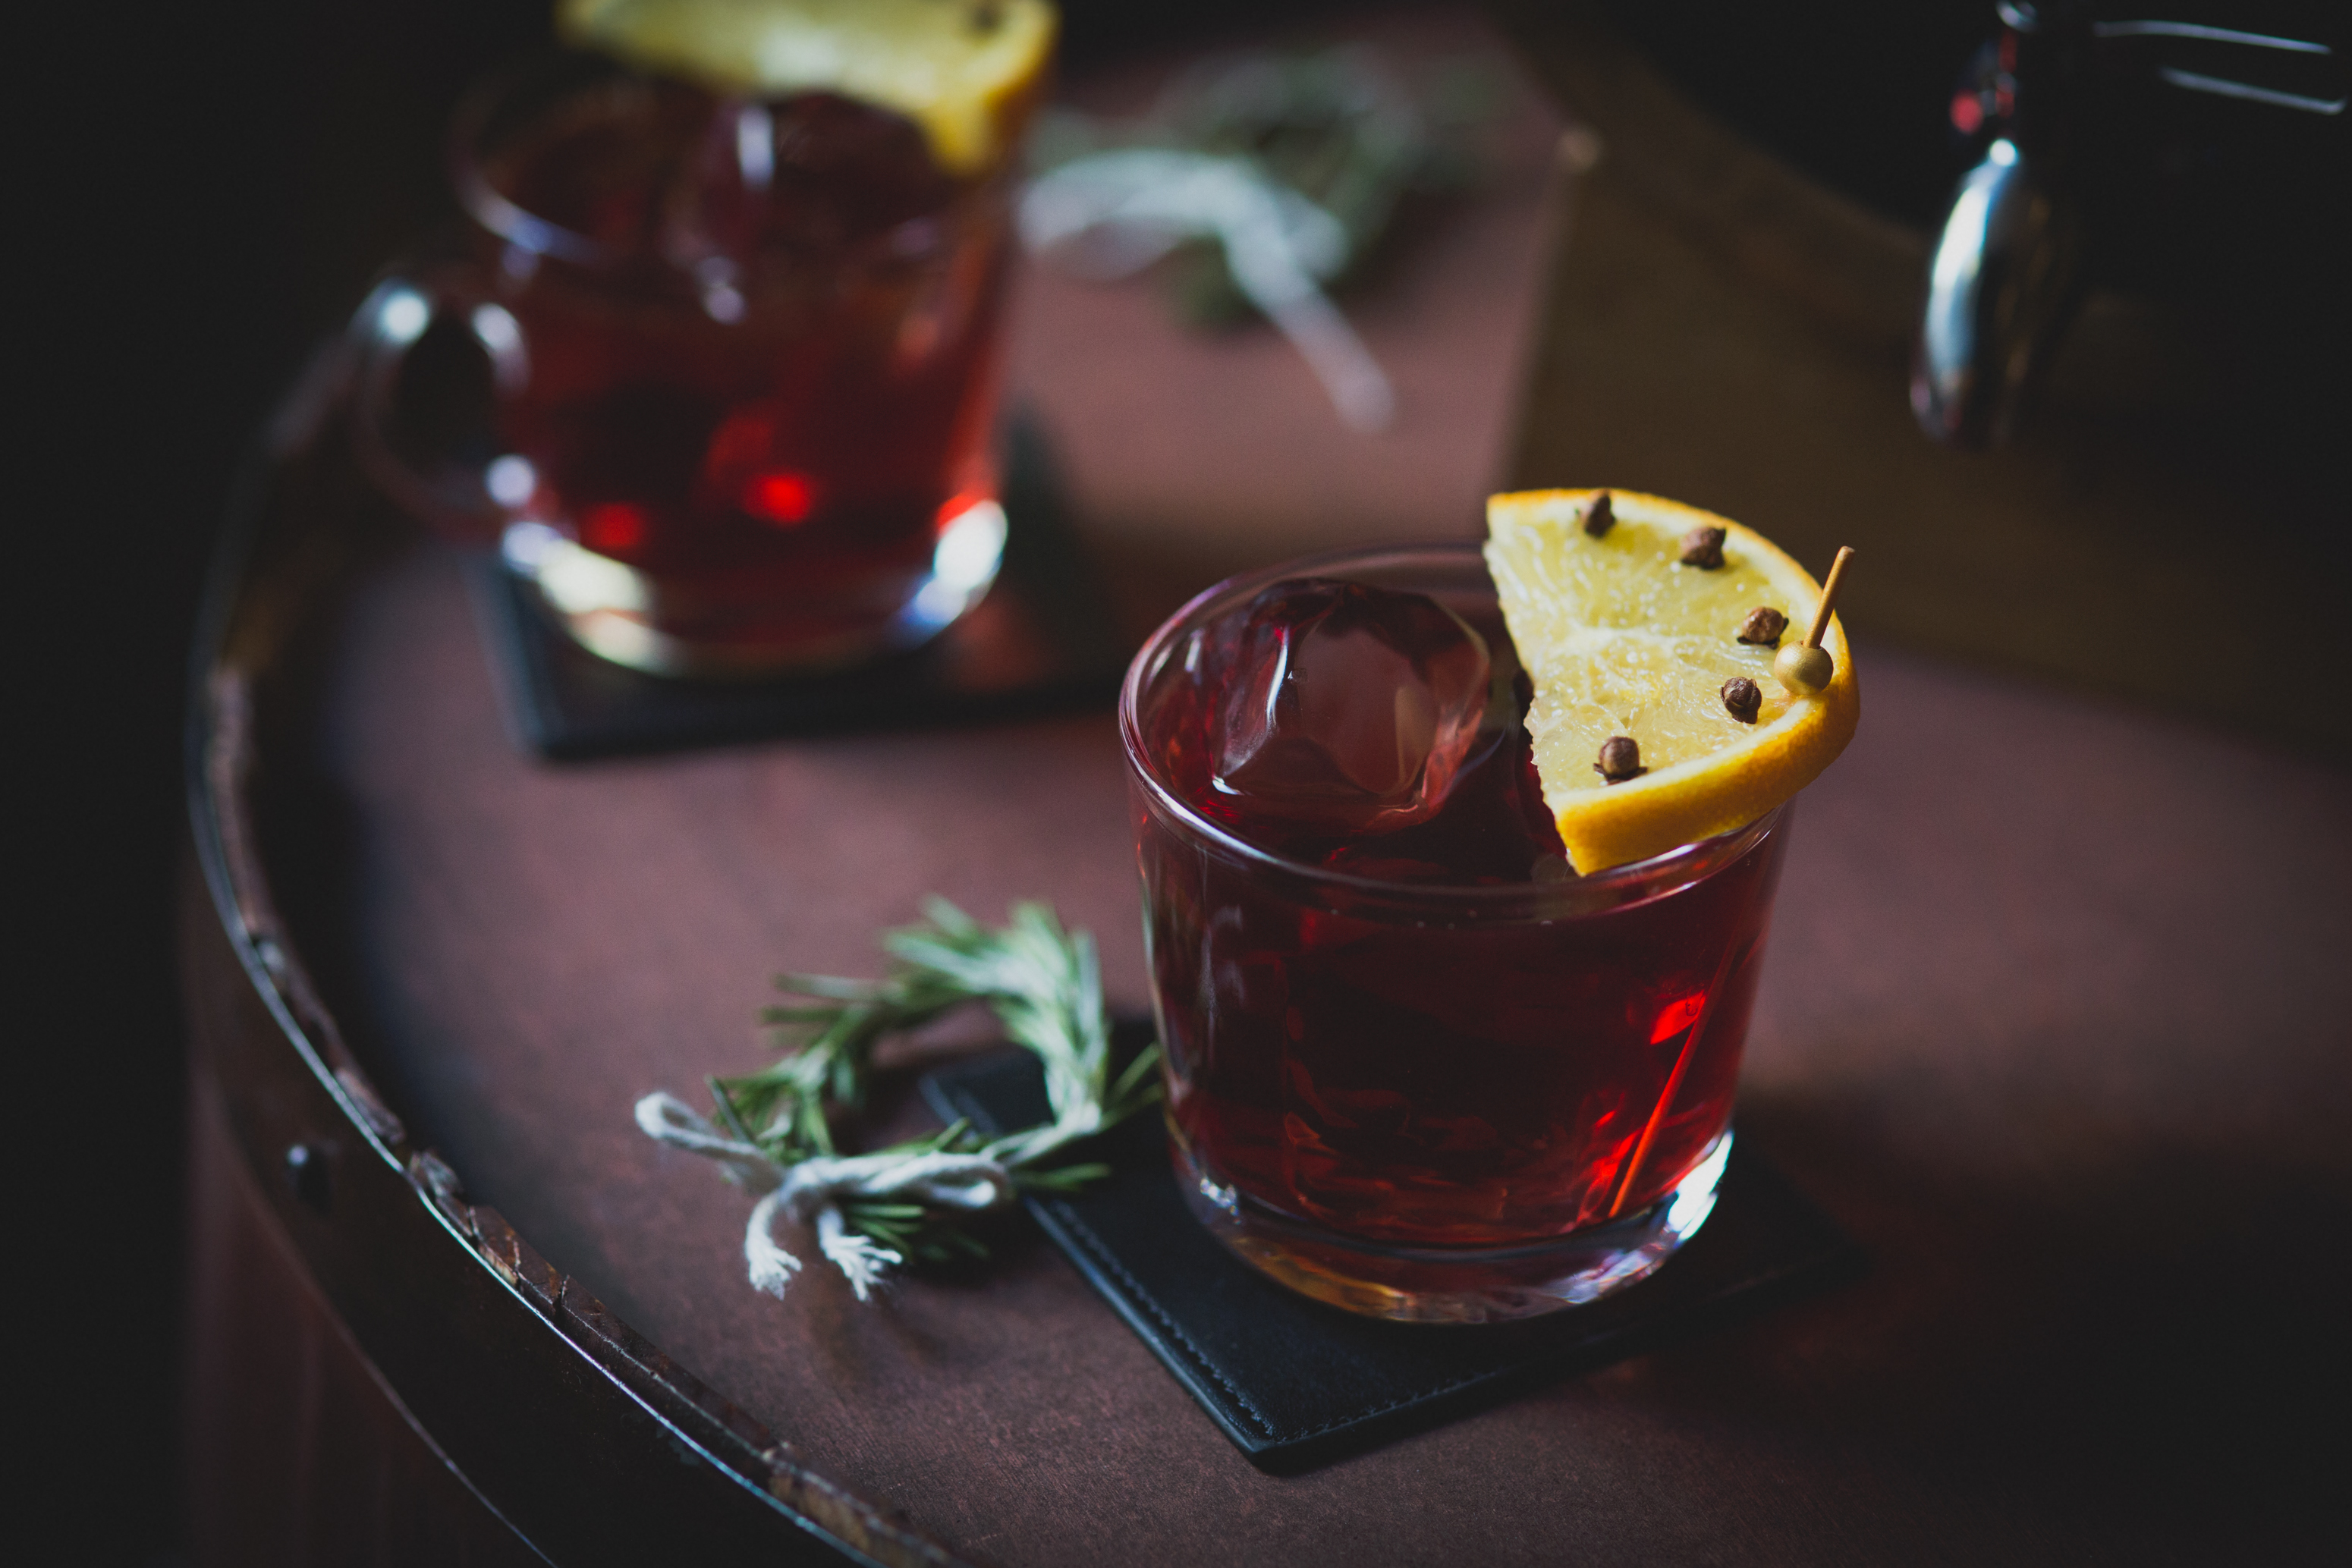 Sherry Merry Punch is one of 4 Zacapa Rum seasonal cocktail recipes.